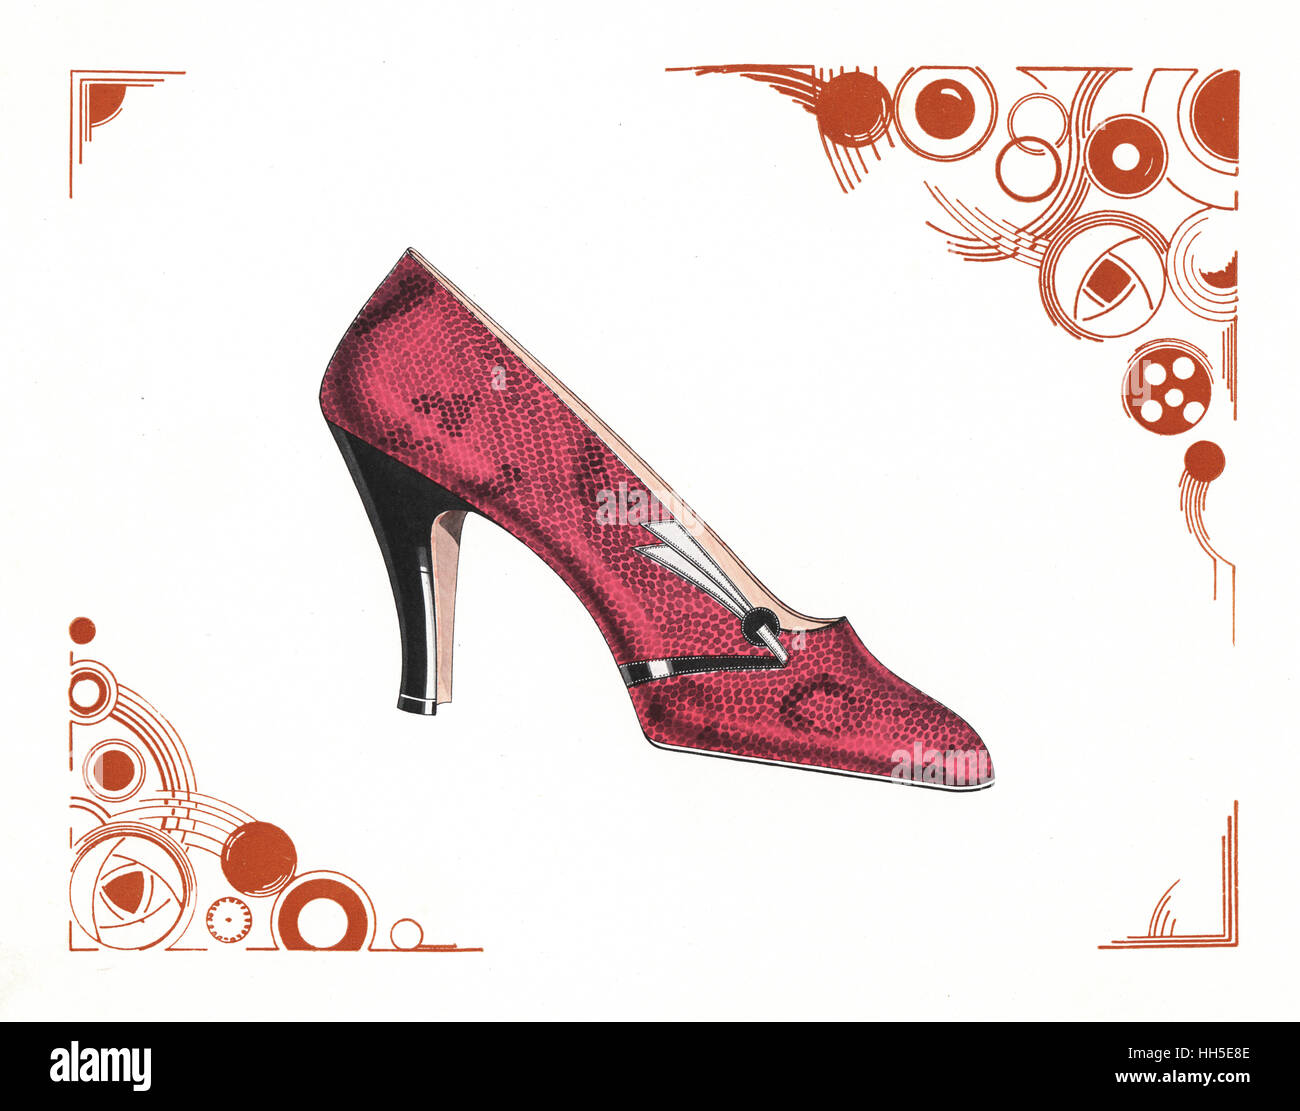 Woman's shoe design in pink snakeskin leather within an art deco abstract border. Chromolithograph from Andre Camy's La Chaussure d'Art, The Art Shoe, August-September, Paris, 1930. Stock Photo